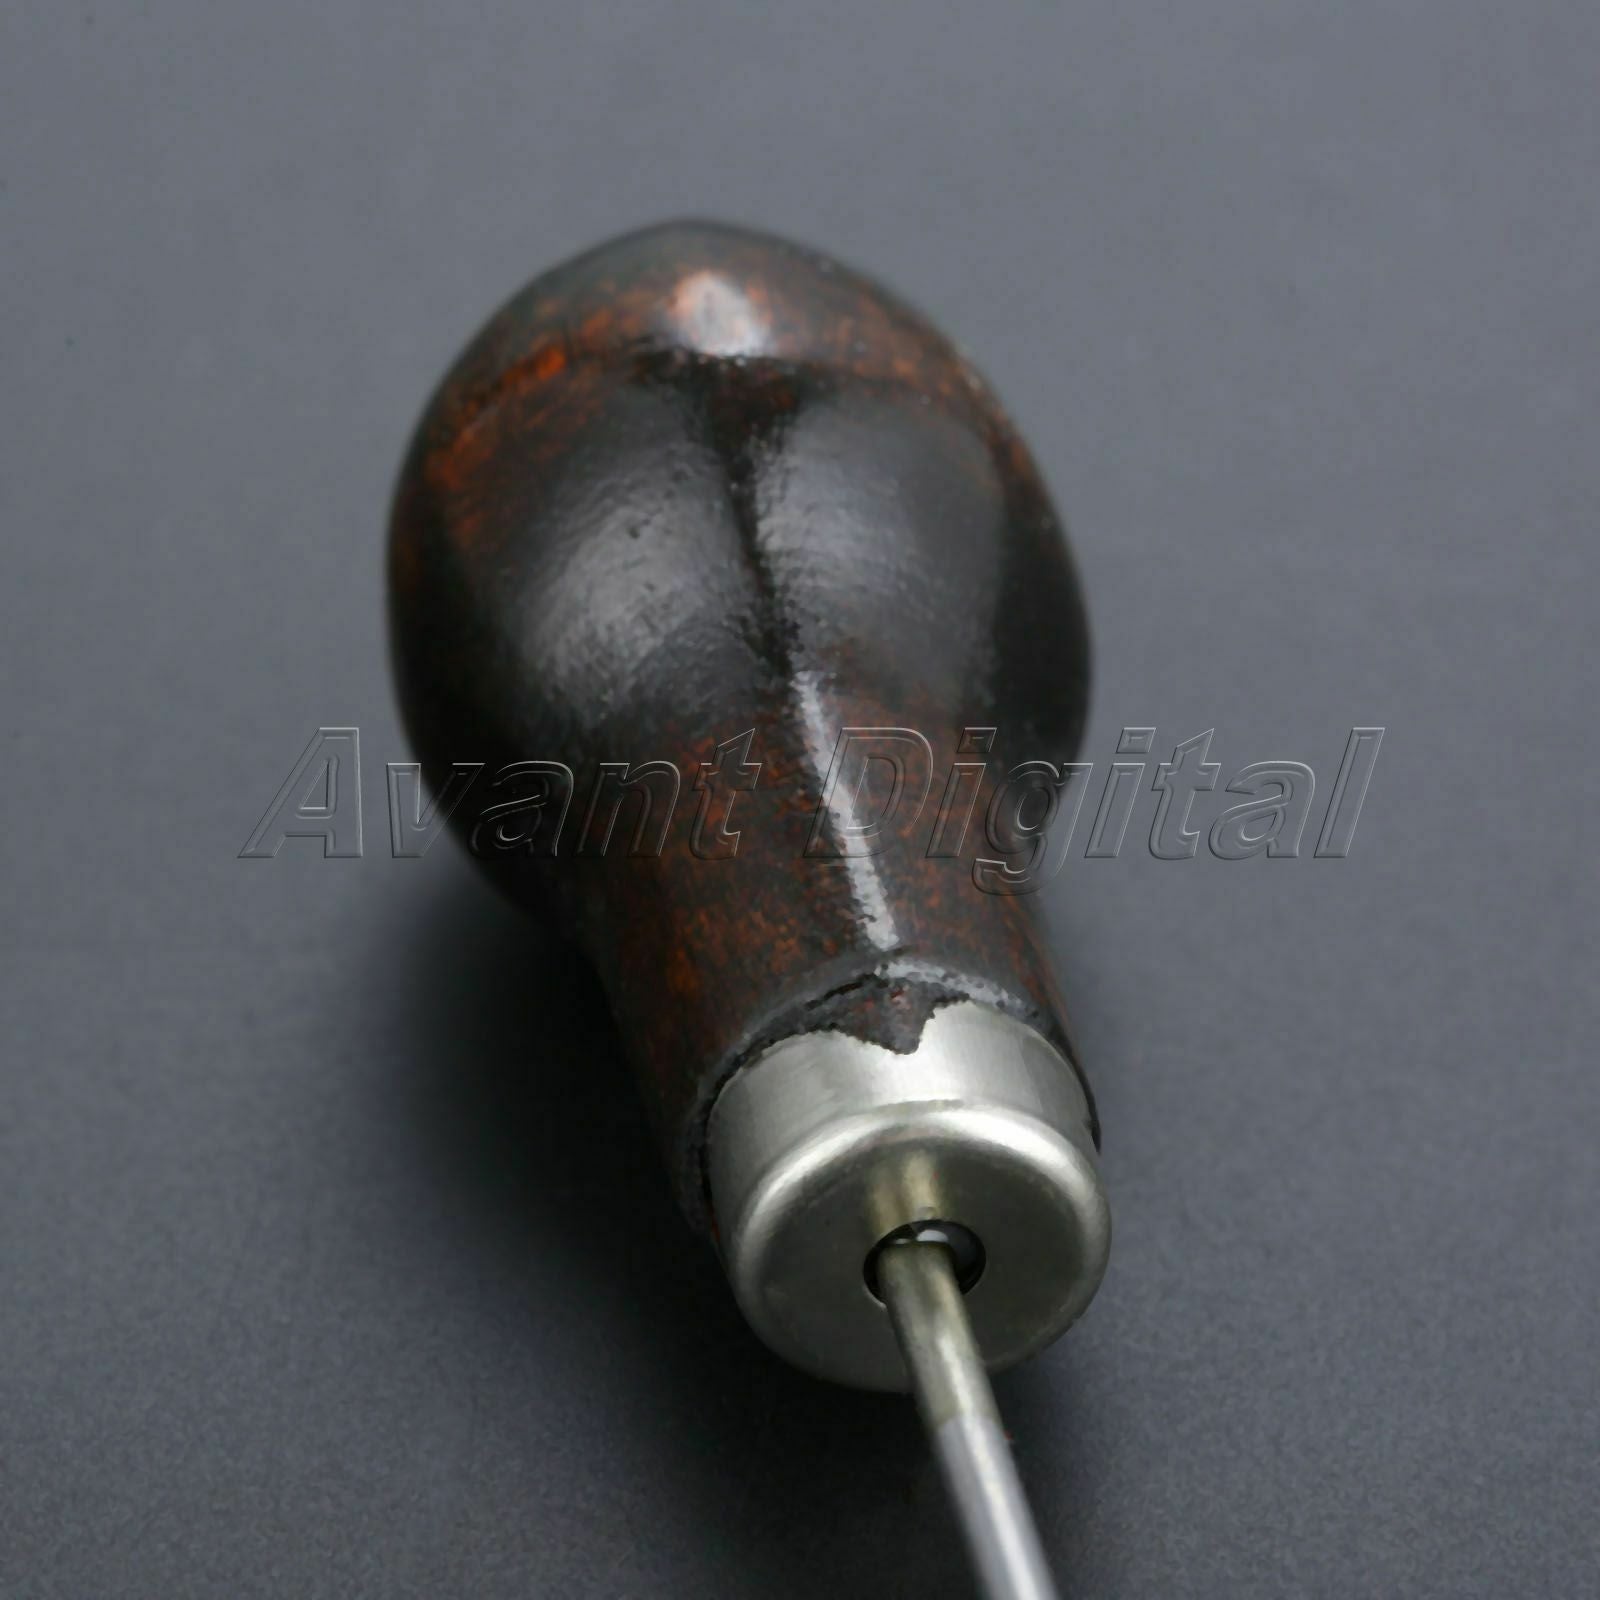 120mm Sewing Awls Leather Stitching Repair Tool 2Pcs Single Gourd Handle Pricker